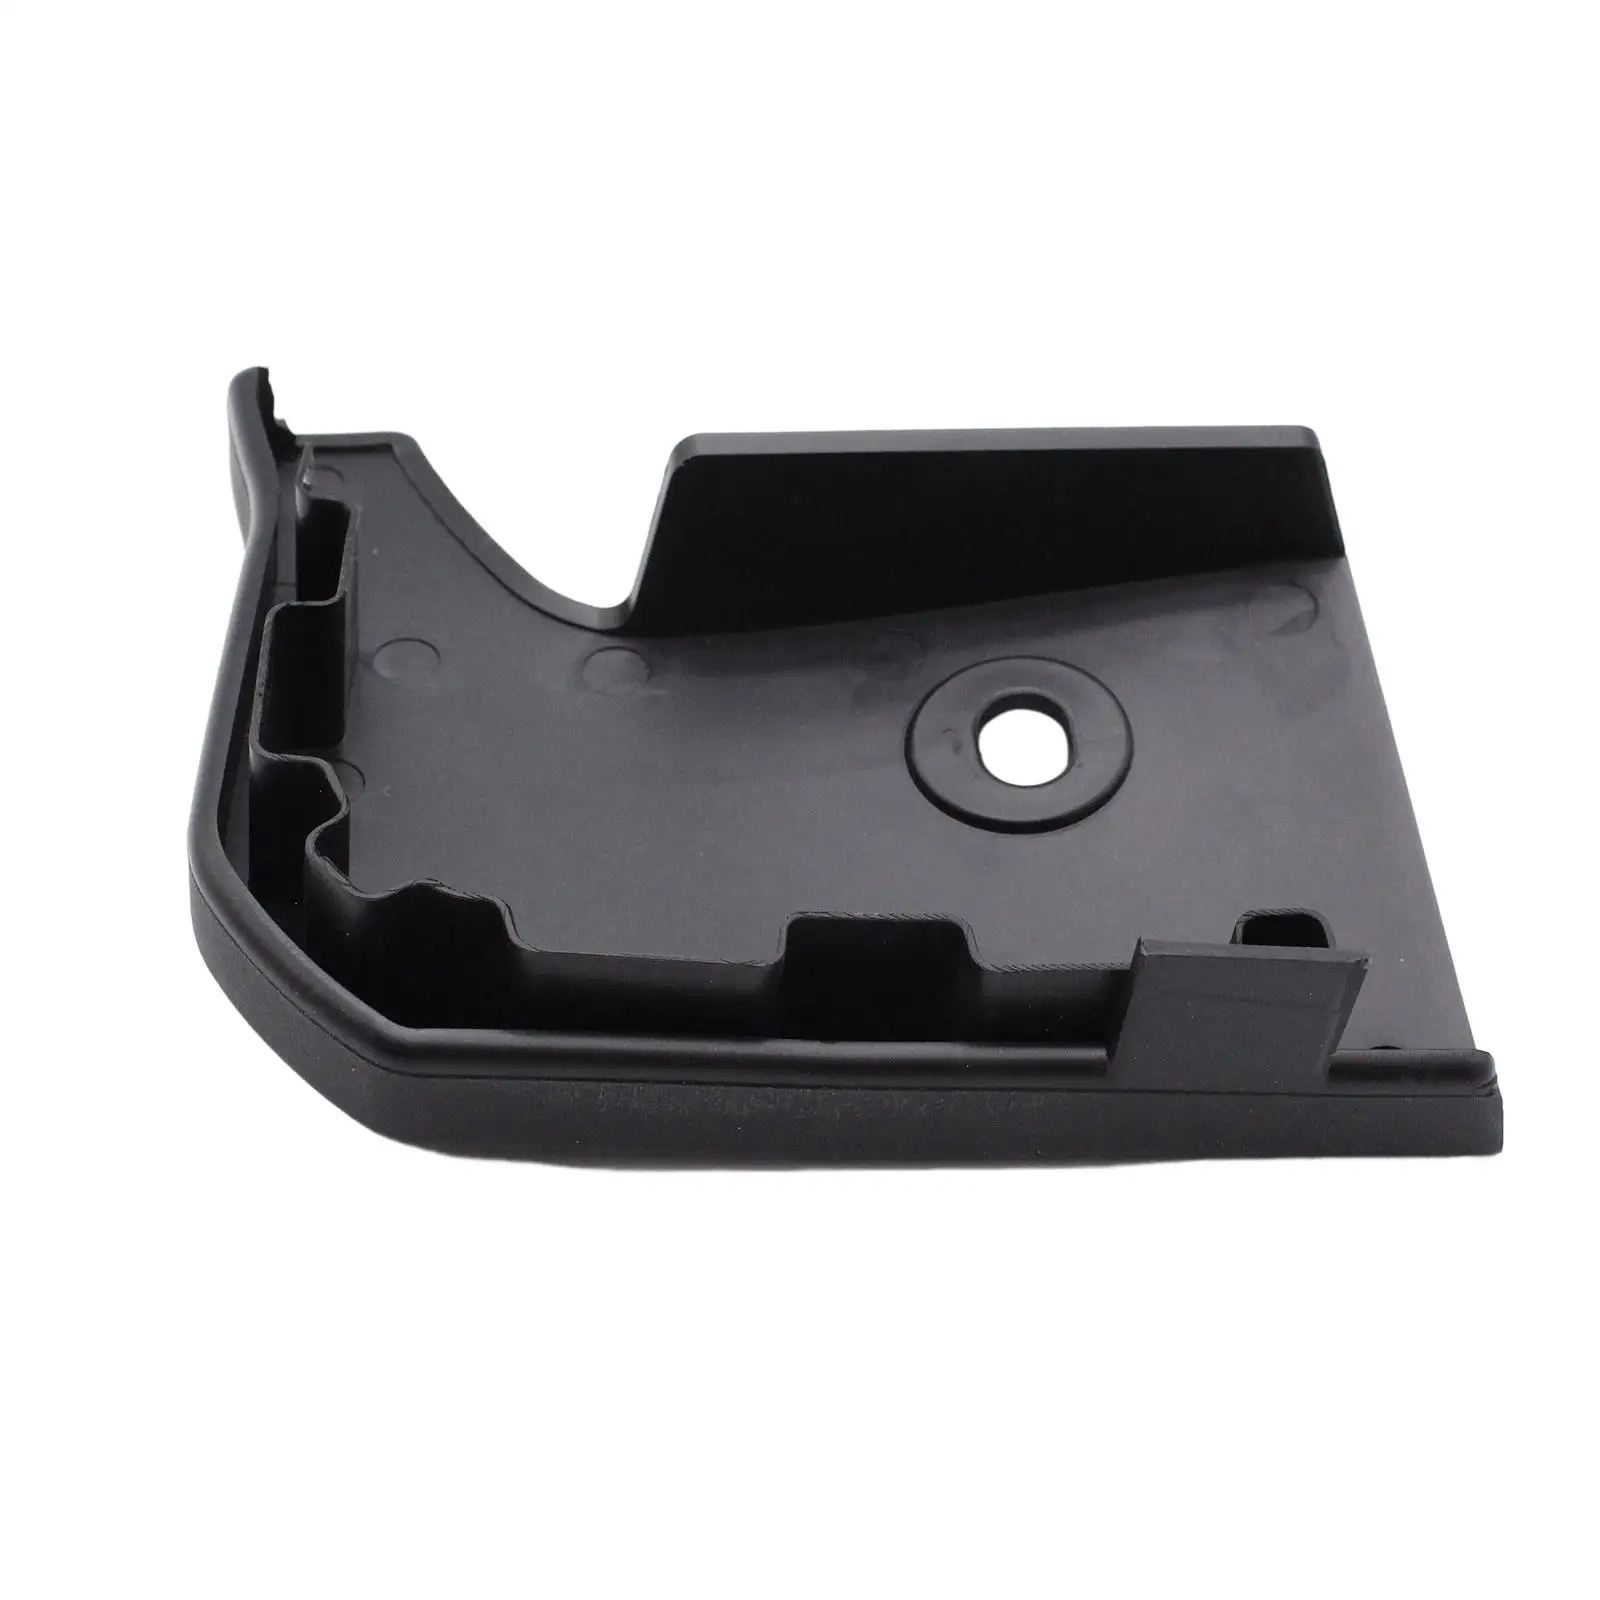 Car Front Left Side Skirt End Cover Caps C1Bj10175AC 1877700 for Ford Fiesta 3 Door Accessory